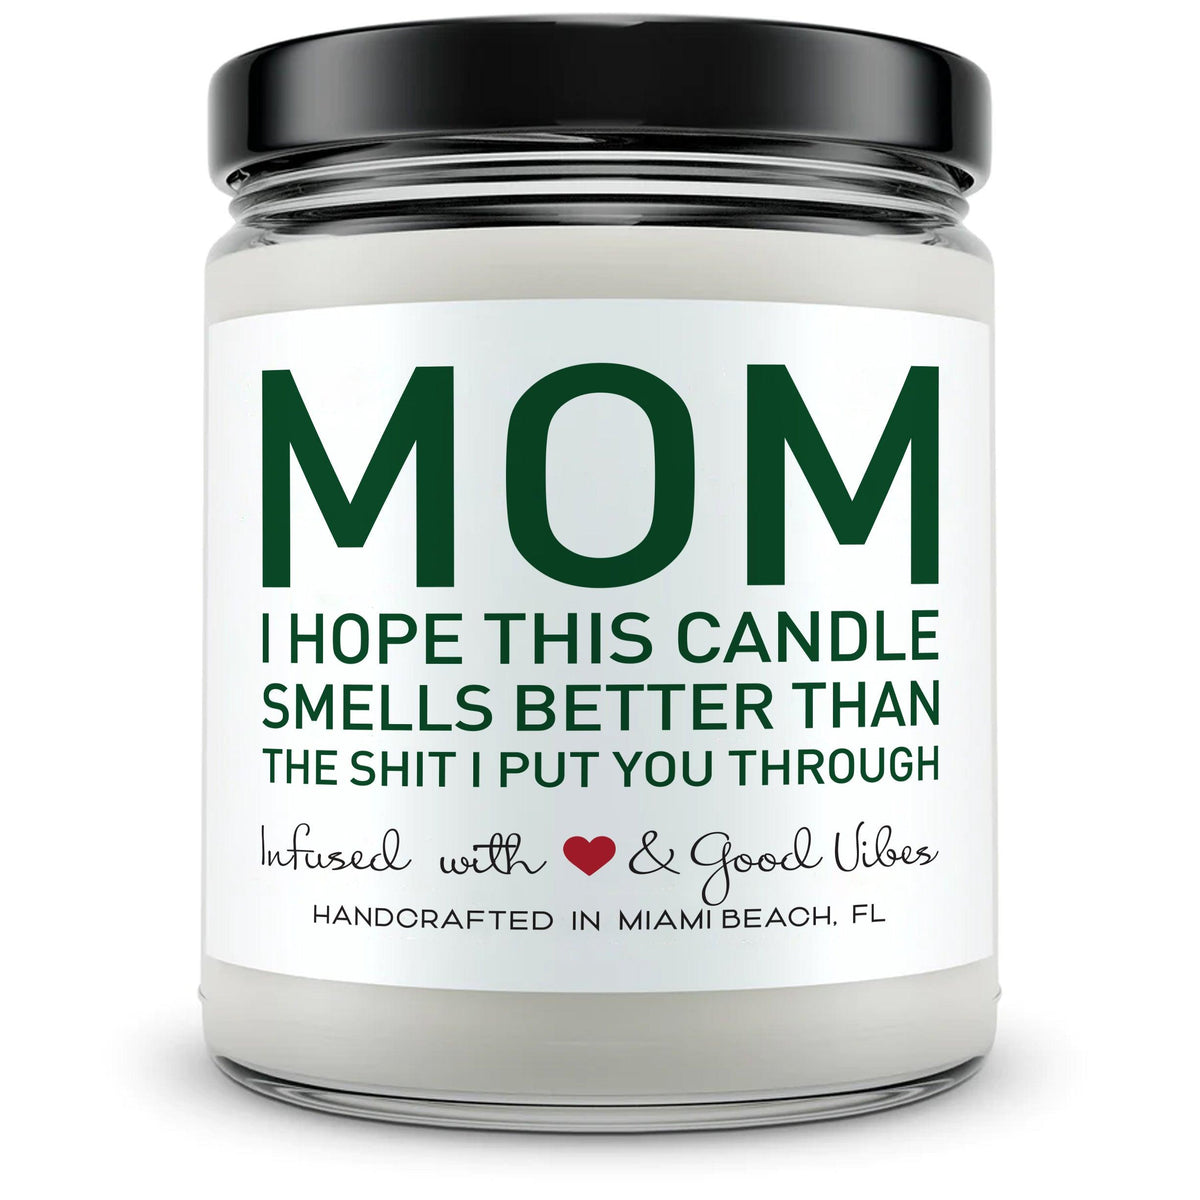 MOM, I hope this candle smells better than the shit I put you through. - Mint Sugar Candle